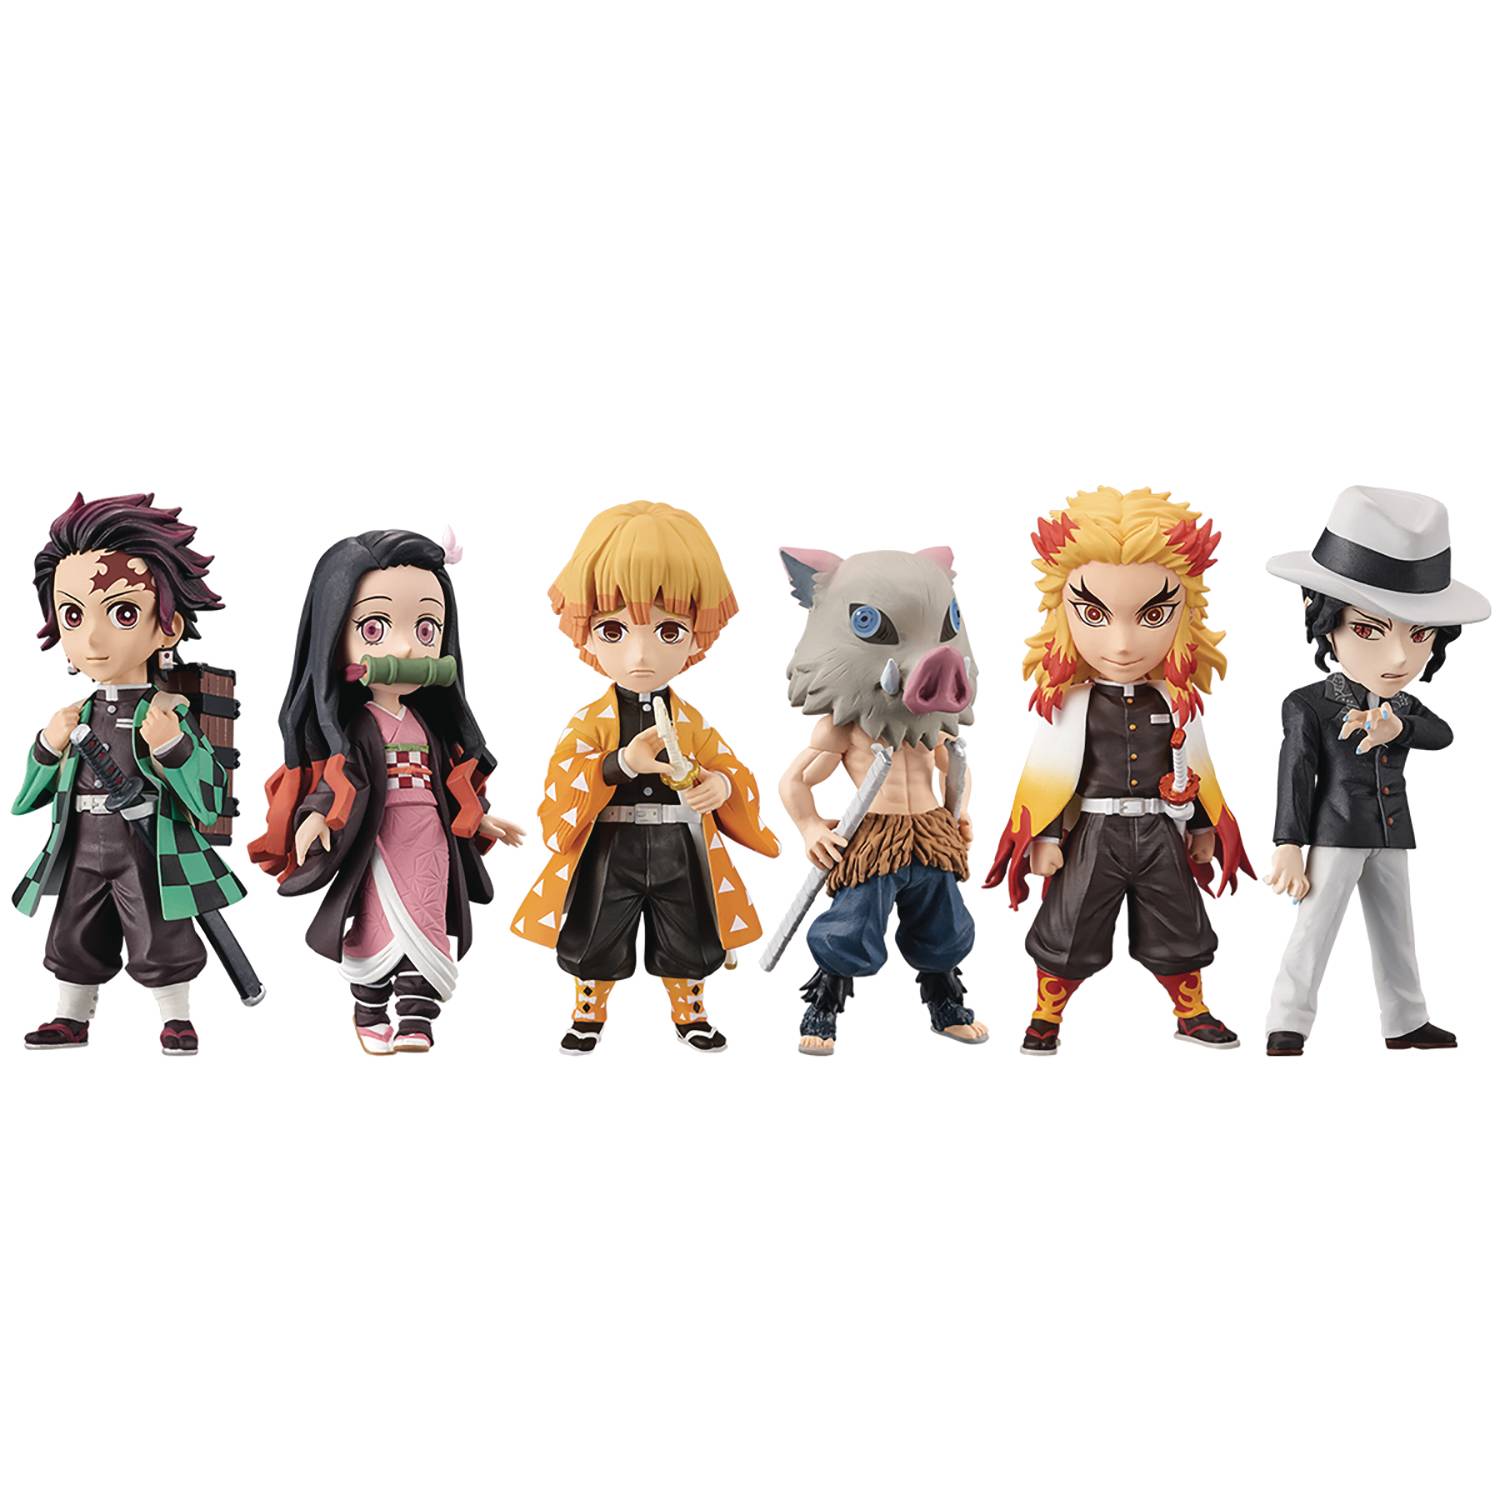 DEMON SLAYER WORLD SPECIAL COLL 12PC BMB FIG ASST